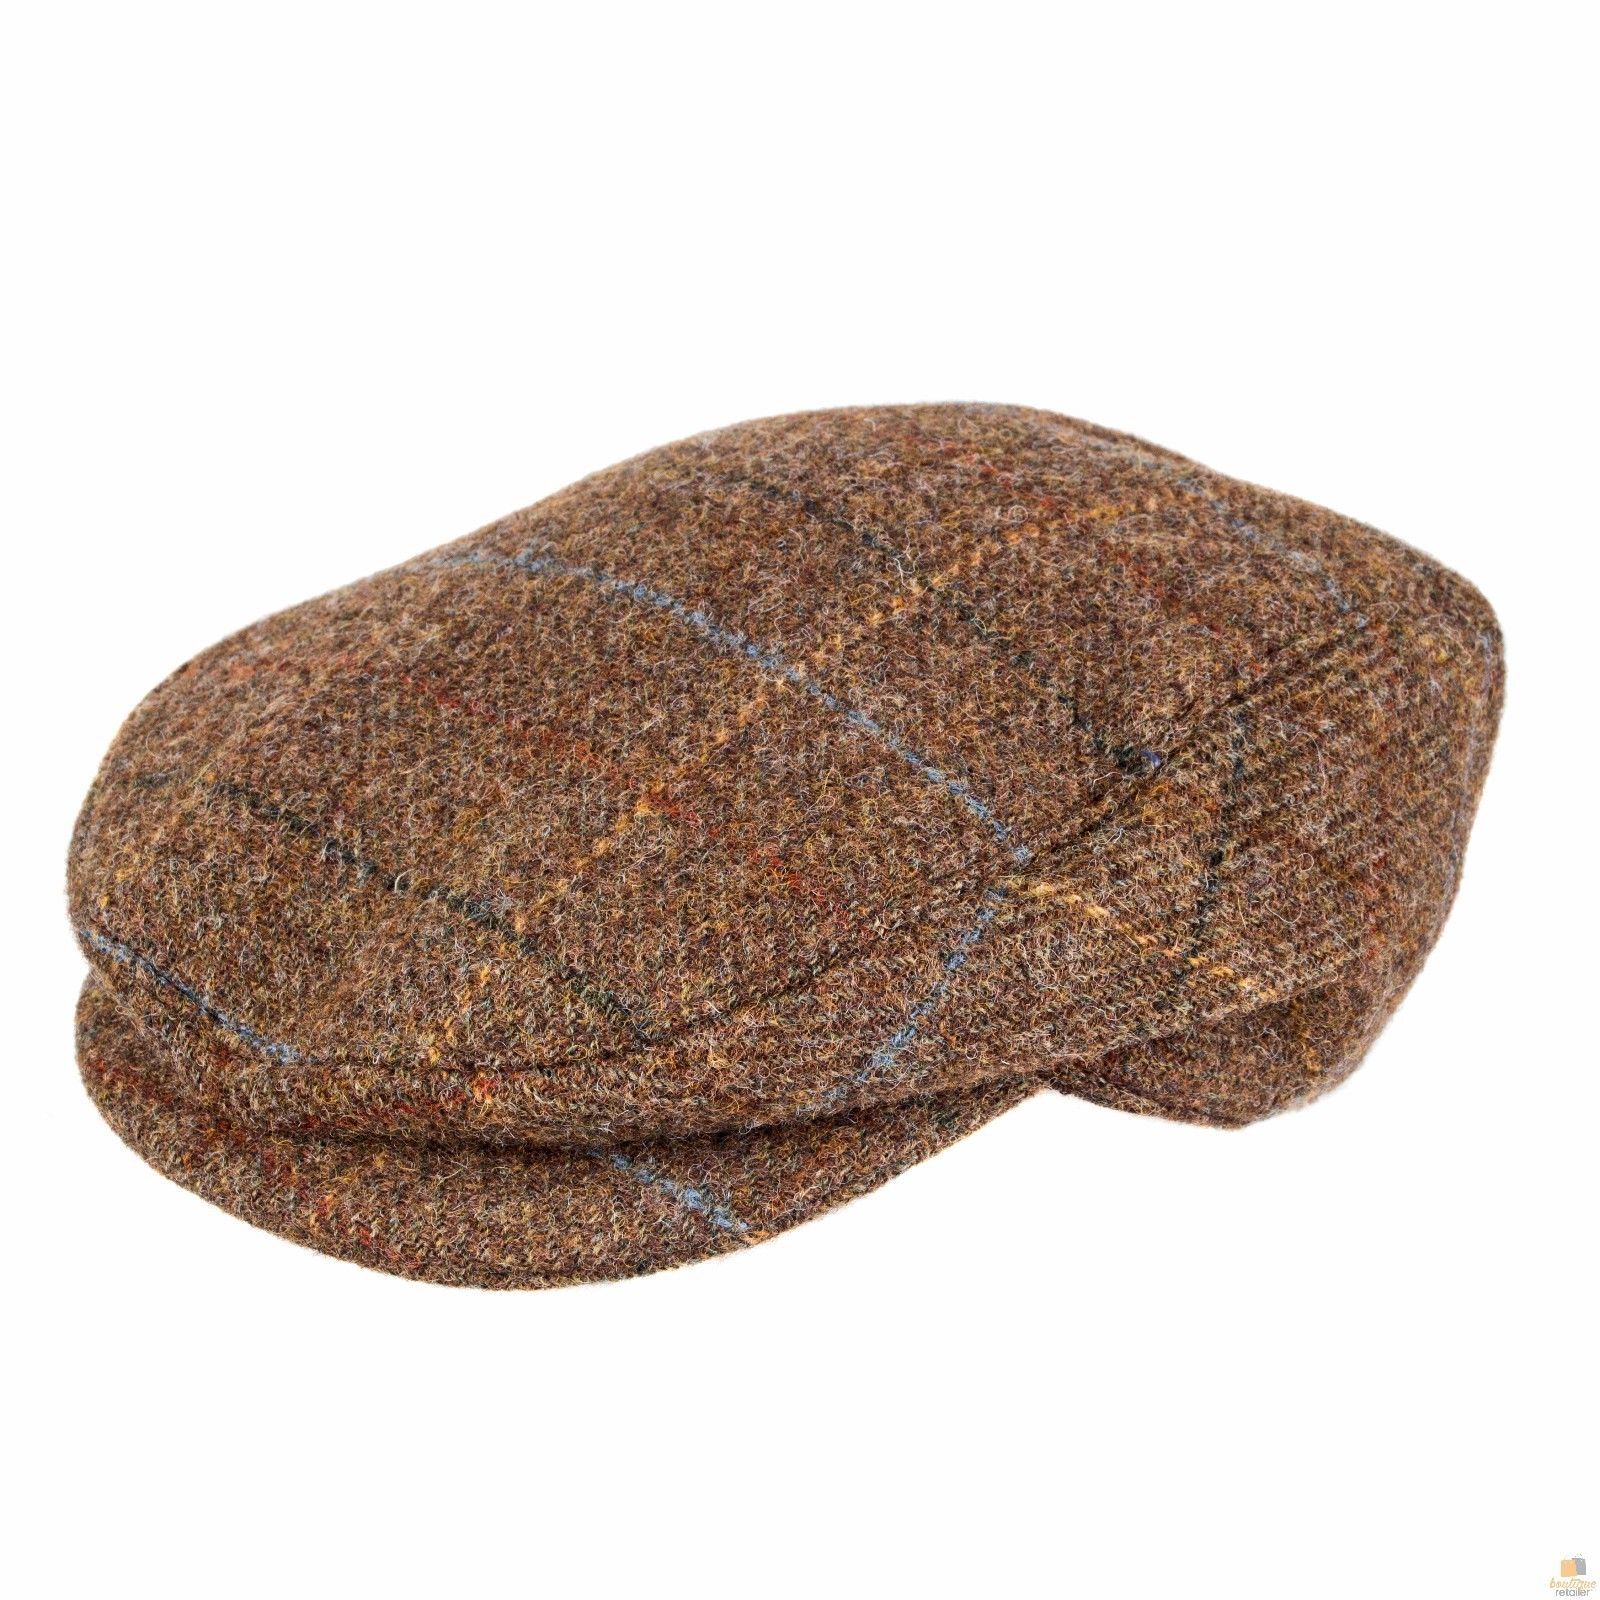 Abraham Moon Tweed Flat Cap Wool Ivy Hat Driving Cabbie Quilted 1-3038 - Chestnut - Large